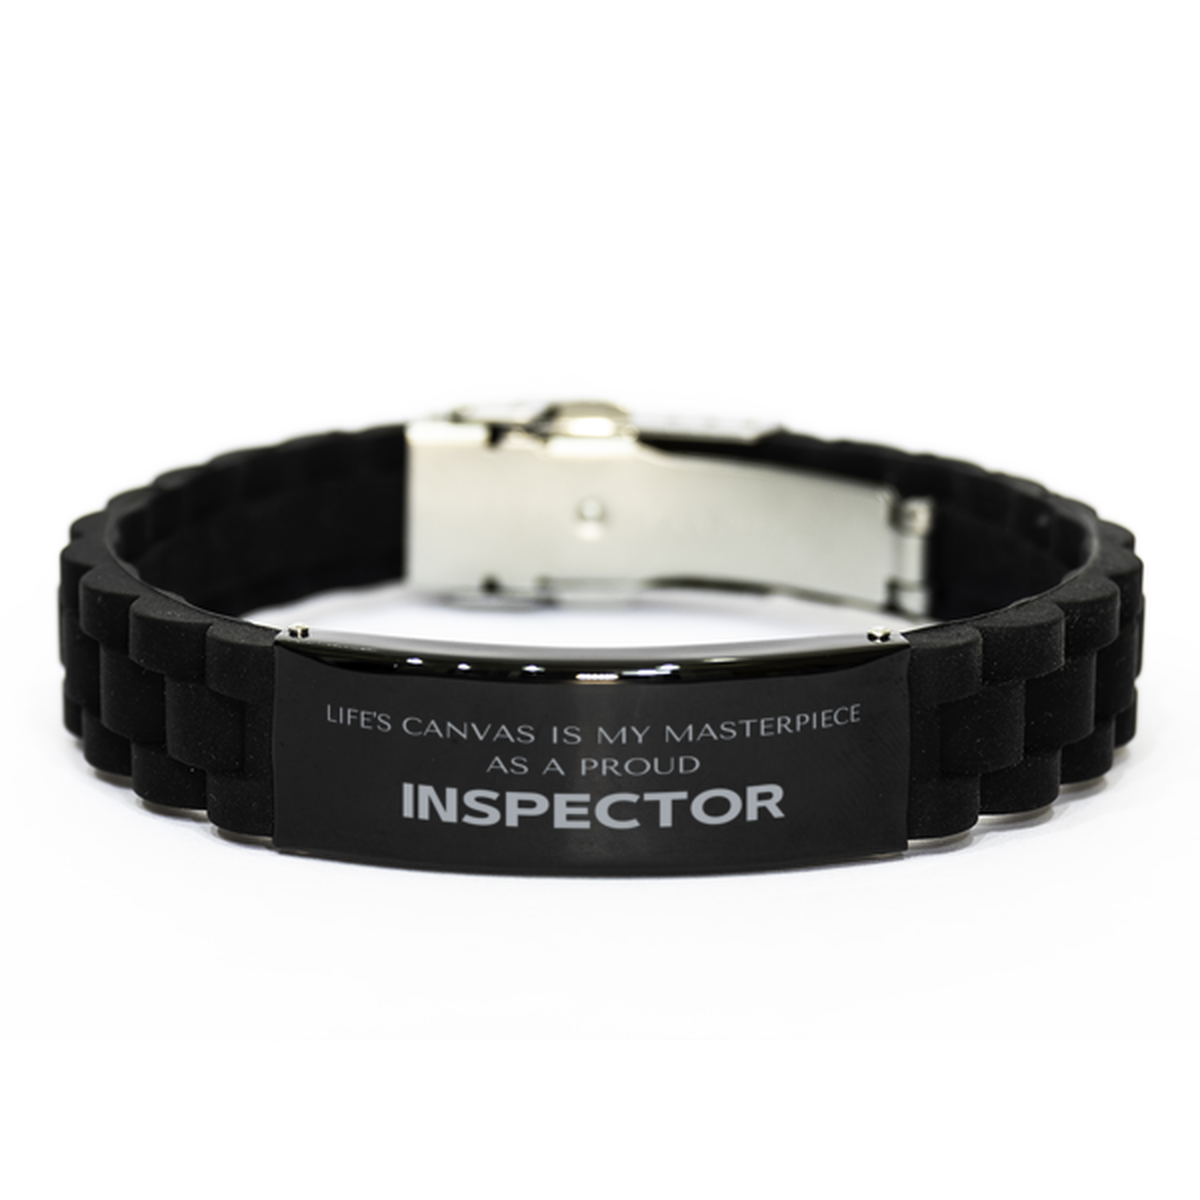 Proud Inspector Gifts, Life's canvas is my masterpiece, Epic Birthday Christmas Unique Black Glidelock Clasp Bracelet For Inspector, Coworkers, Men, Women, Friends